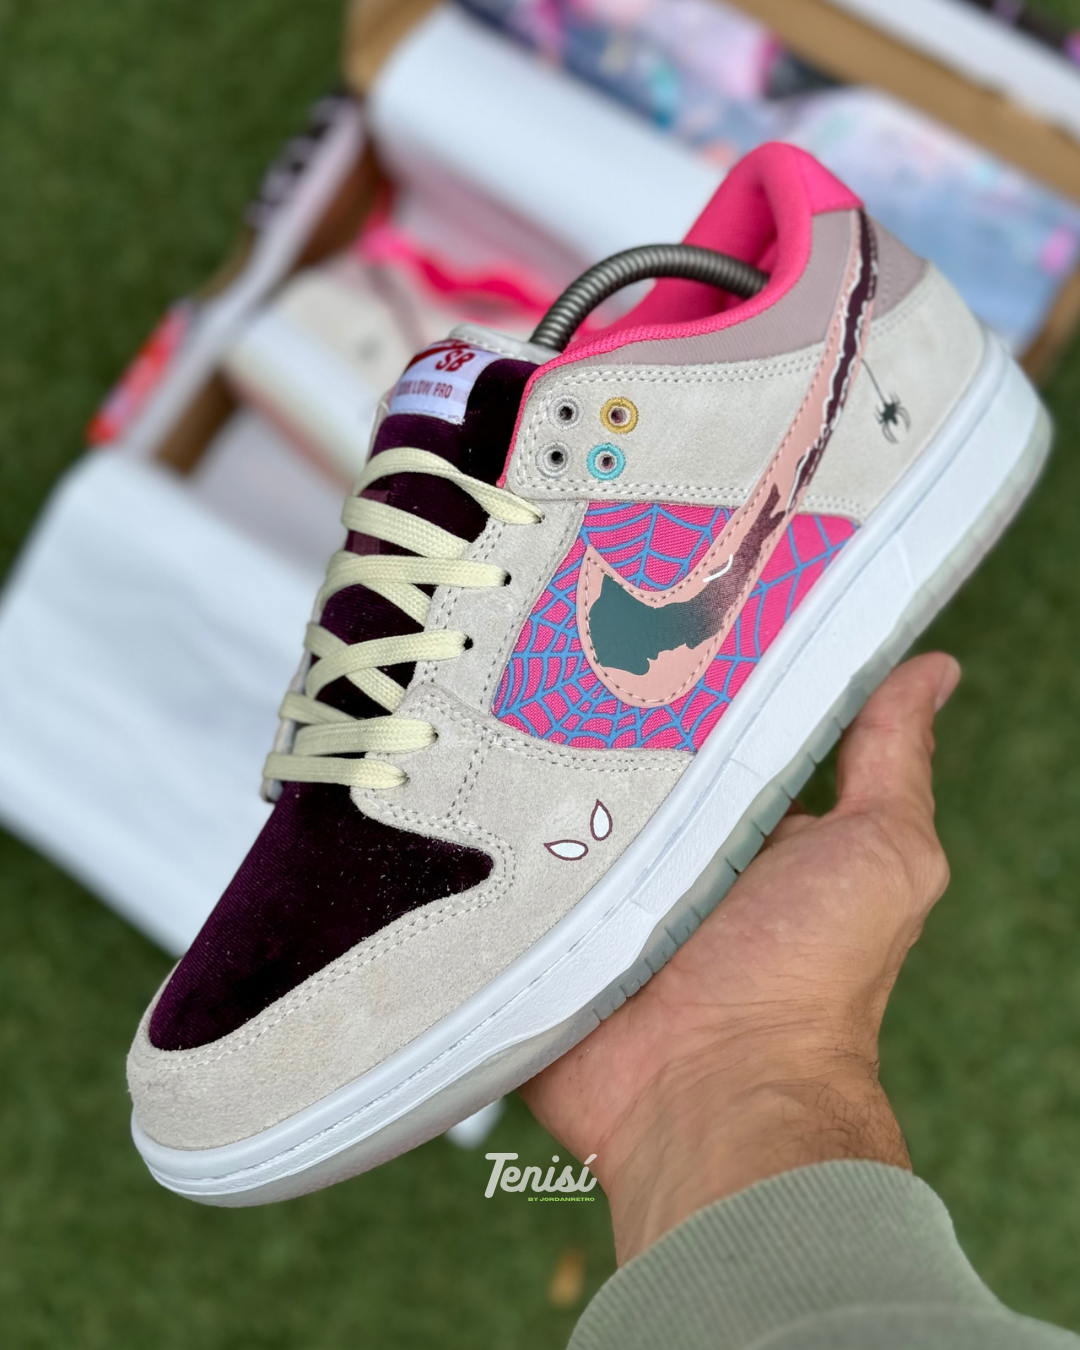 Nike Dunk Low x Spider-Verse "Gwen Stacy"